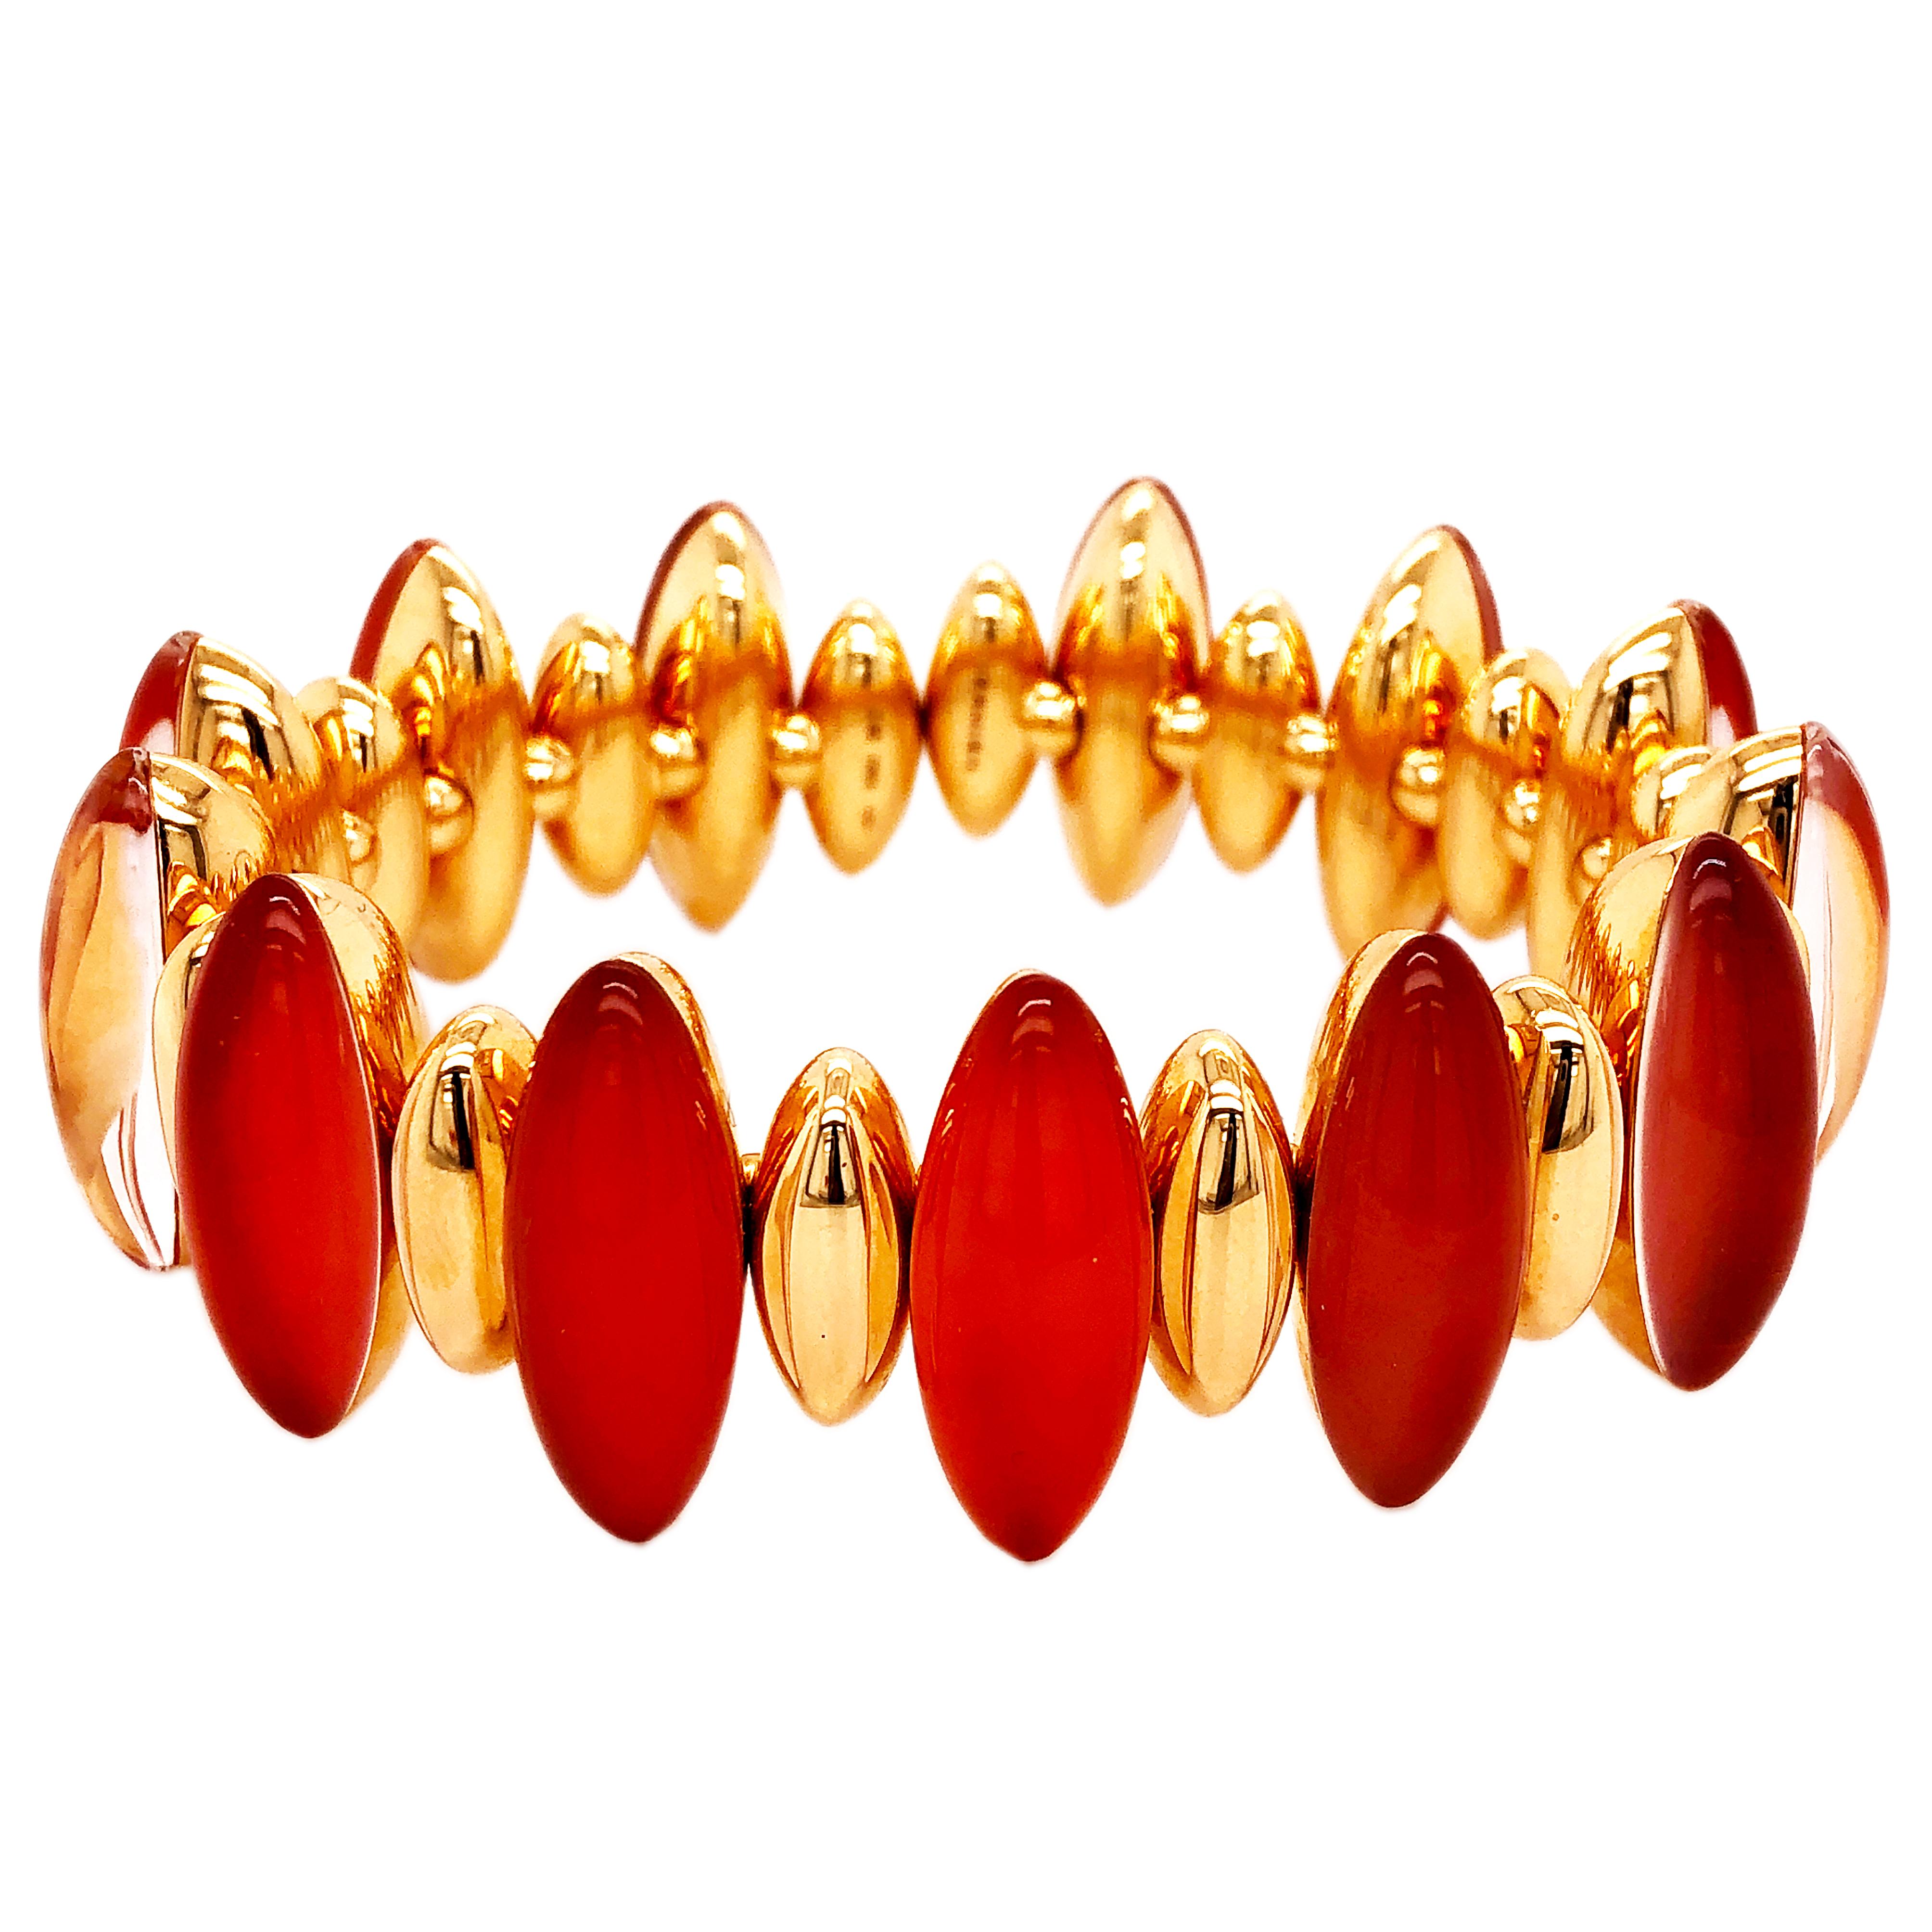 Absolutely Chic yet Timeless, Extraordinary Bracelet combining Red Carnelian Rock Crystal Cabochon with sparkling Rose Gold. These contemporary Fuseaux remember us Sleeping Beauty Fairy Tale, elongated volumes defining absolute refinement, out of